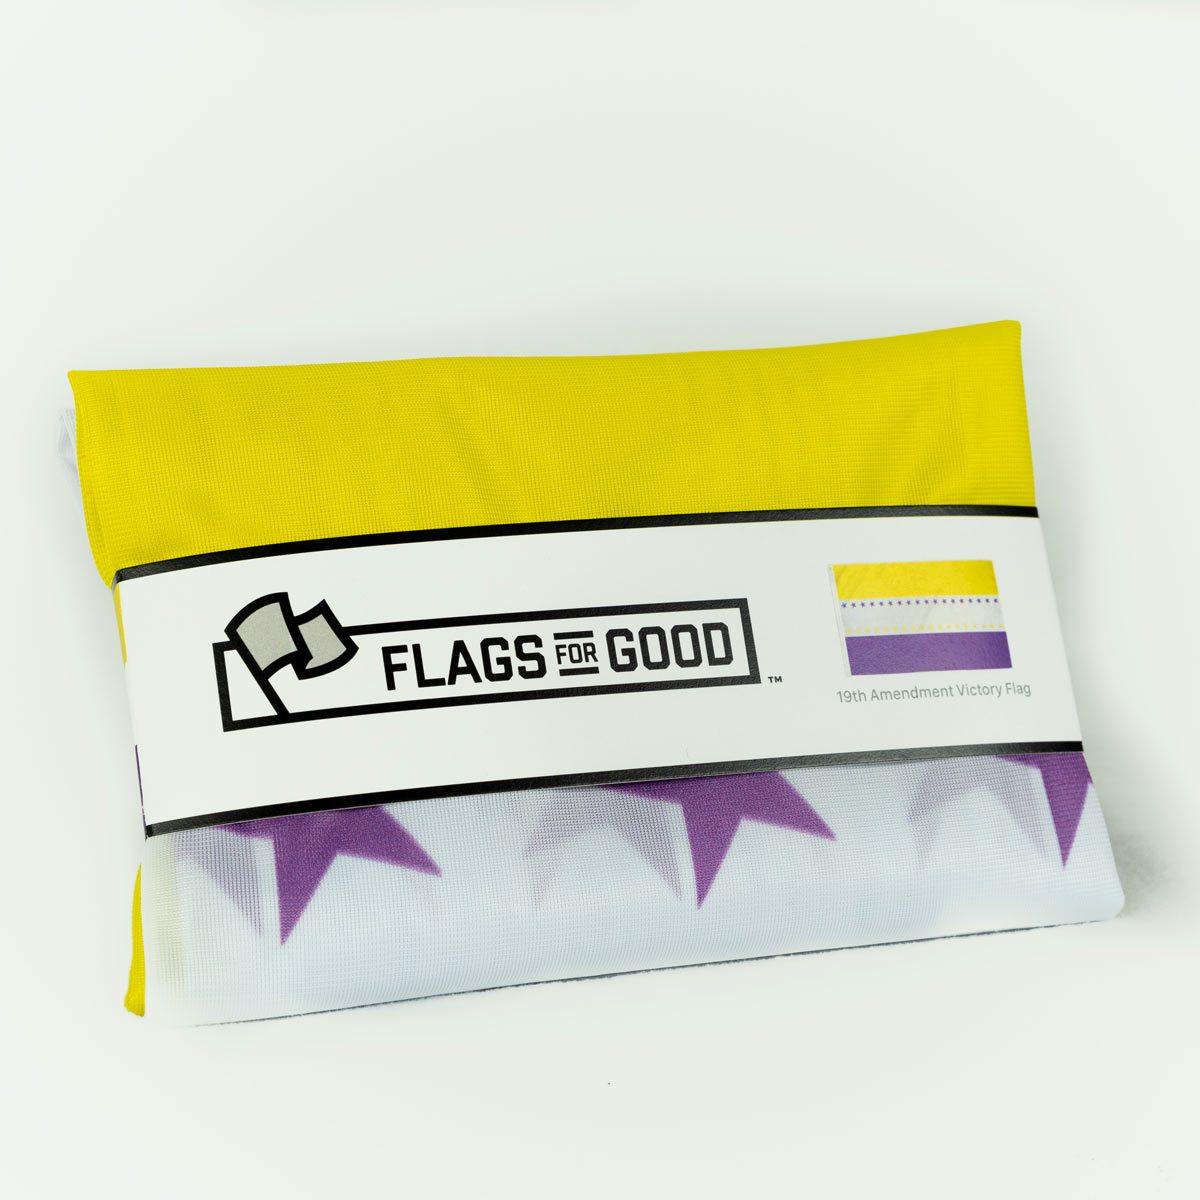 Women's Suffrage Victory Flag | Flags for Good